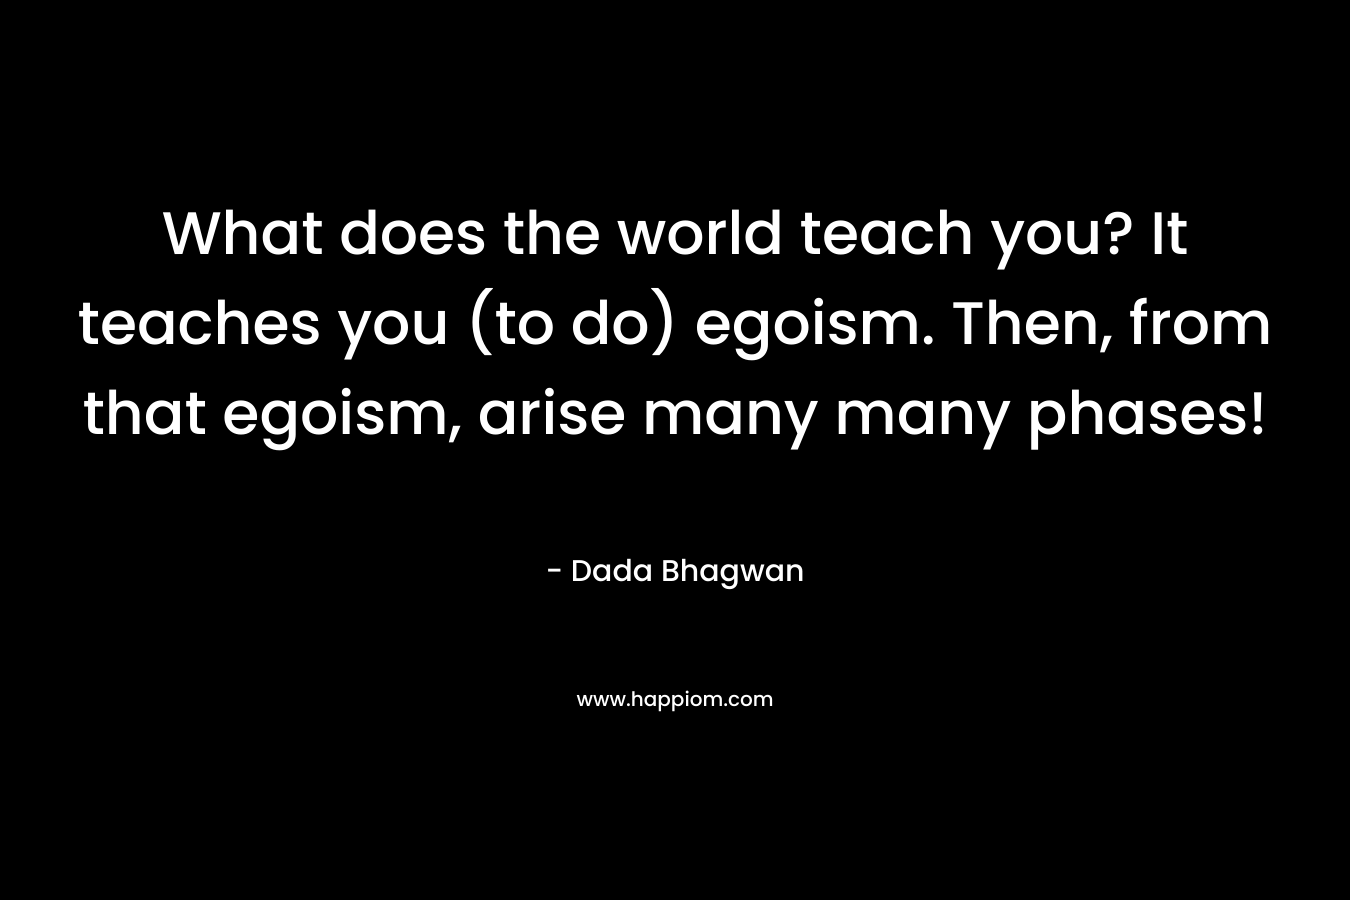 What does the world teach you? It teaches you (to do) egoism. Then, from that egoism, arise many many phases! – Dada Bhagwan